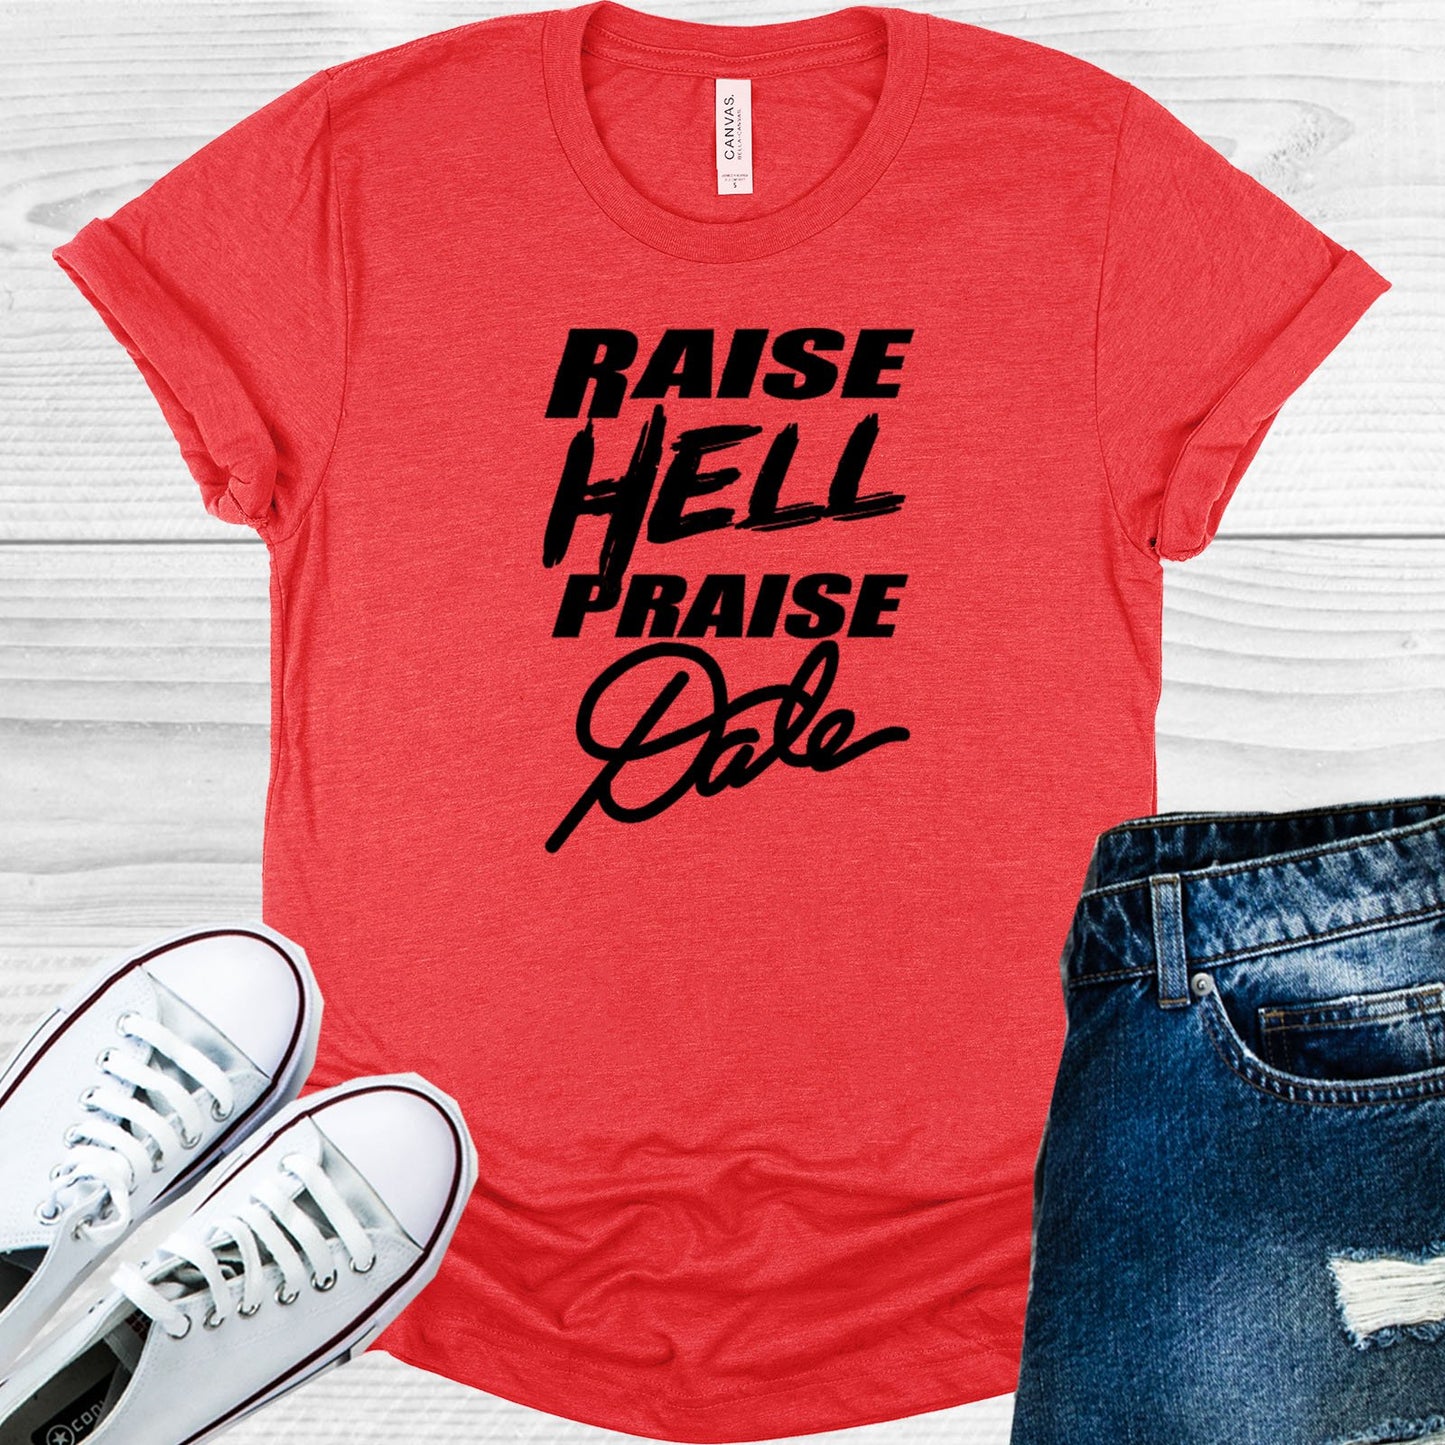 Raise Hell Praise Dale Graphic Tee Graphic Tee